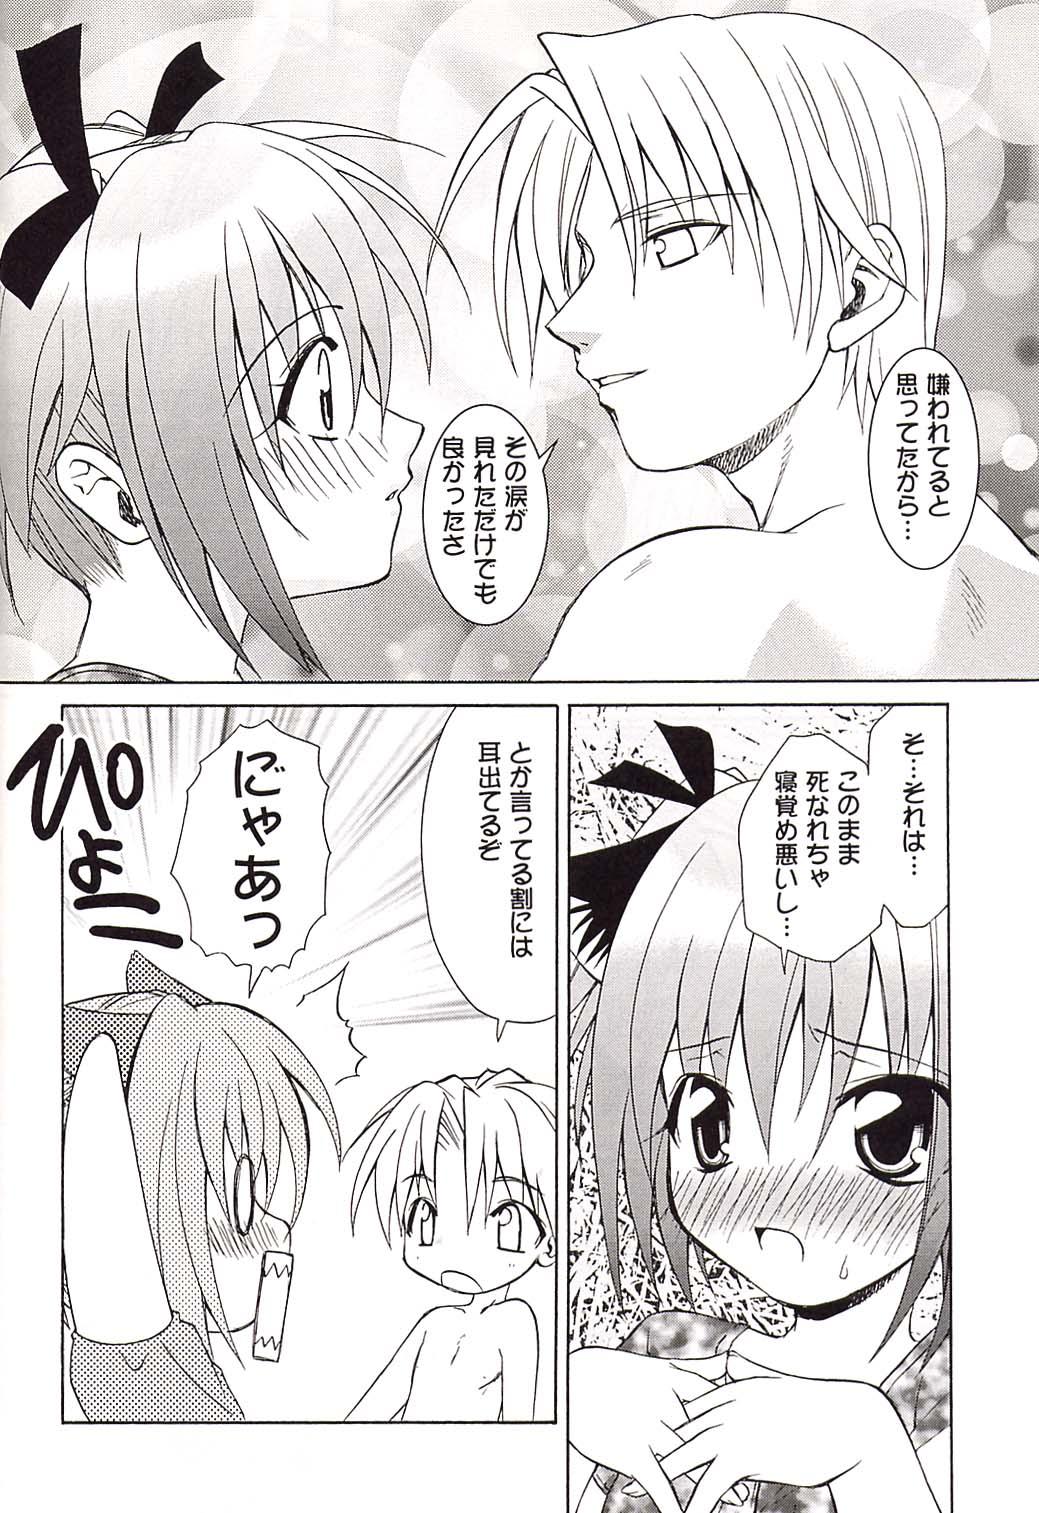 Culote Strawberry sex - Tokyo mew mew Couples Fucking - Page 13